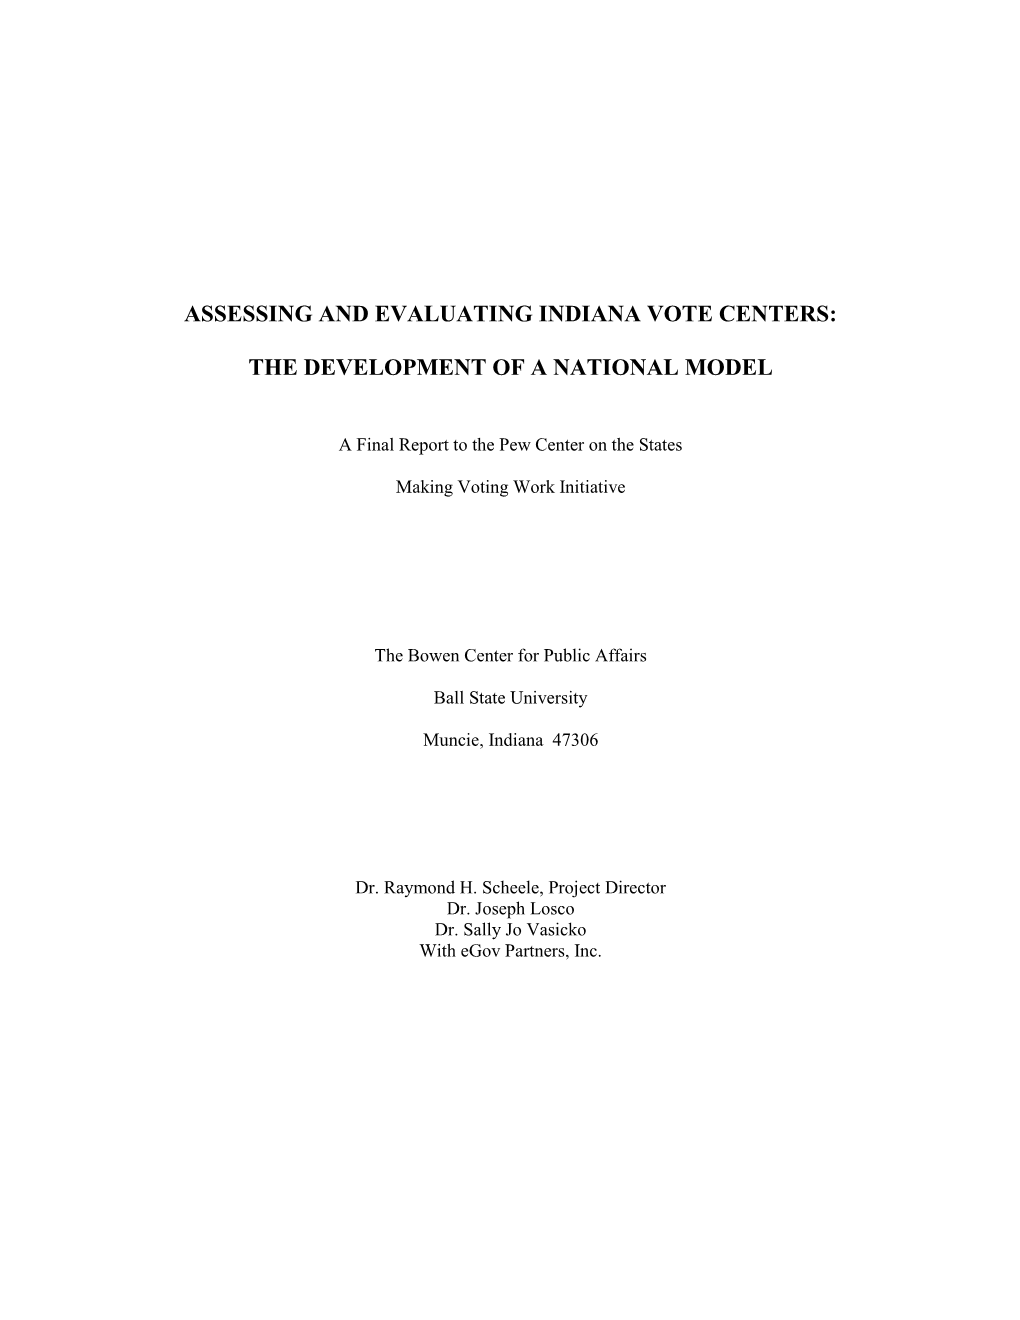 Assessing and Evaluating Indiana Vote Centers: the Development of A